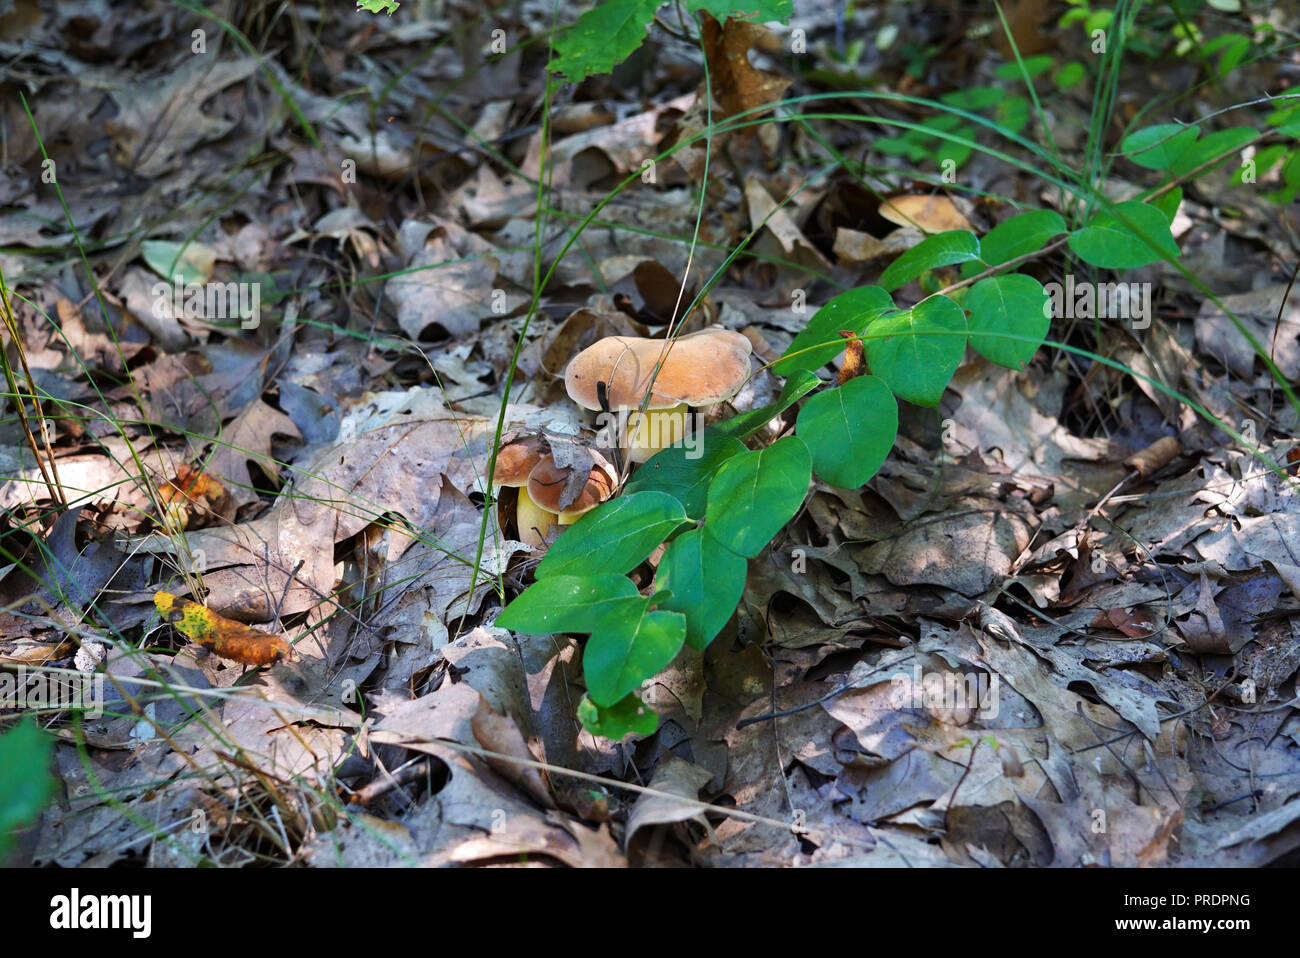 A group of Mushrooms with a brown cap made their way from under the dry foliage in the forest. Fungi are surrounded by large autumn leaves. In the for Stock Photo